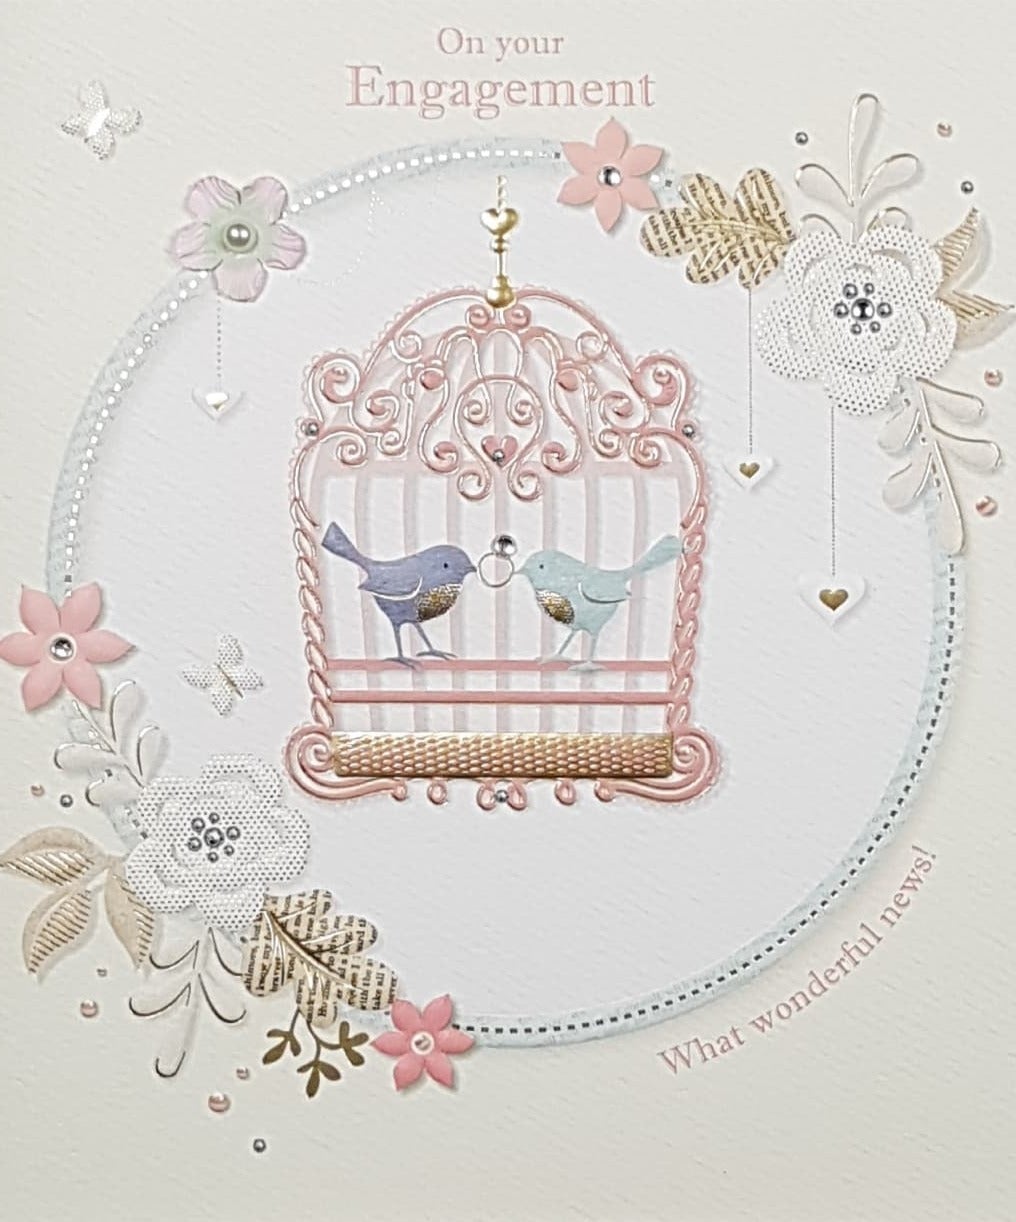 Engagement Card - Two Love Birds Holding Engagement Ring In A Pink Cage